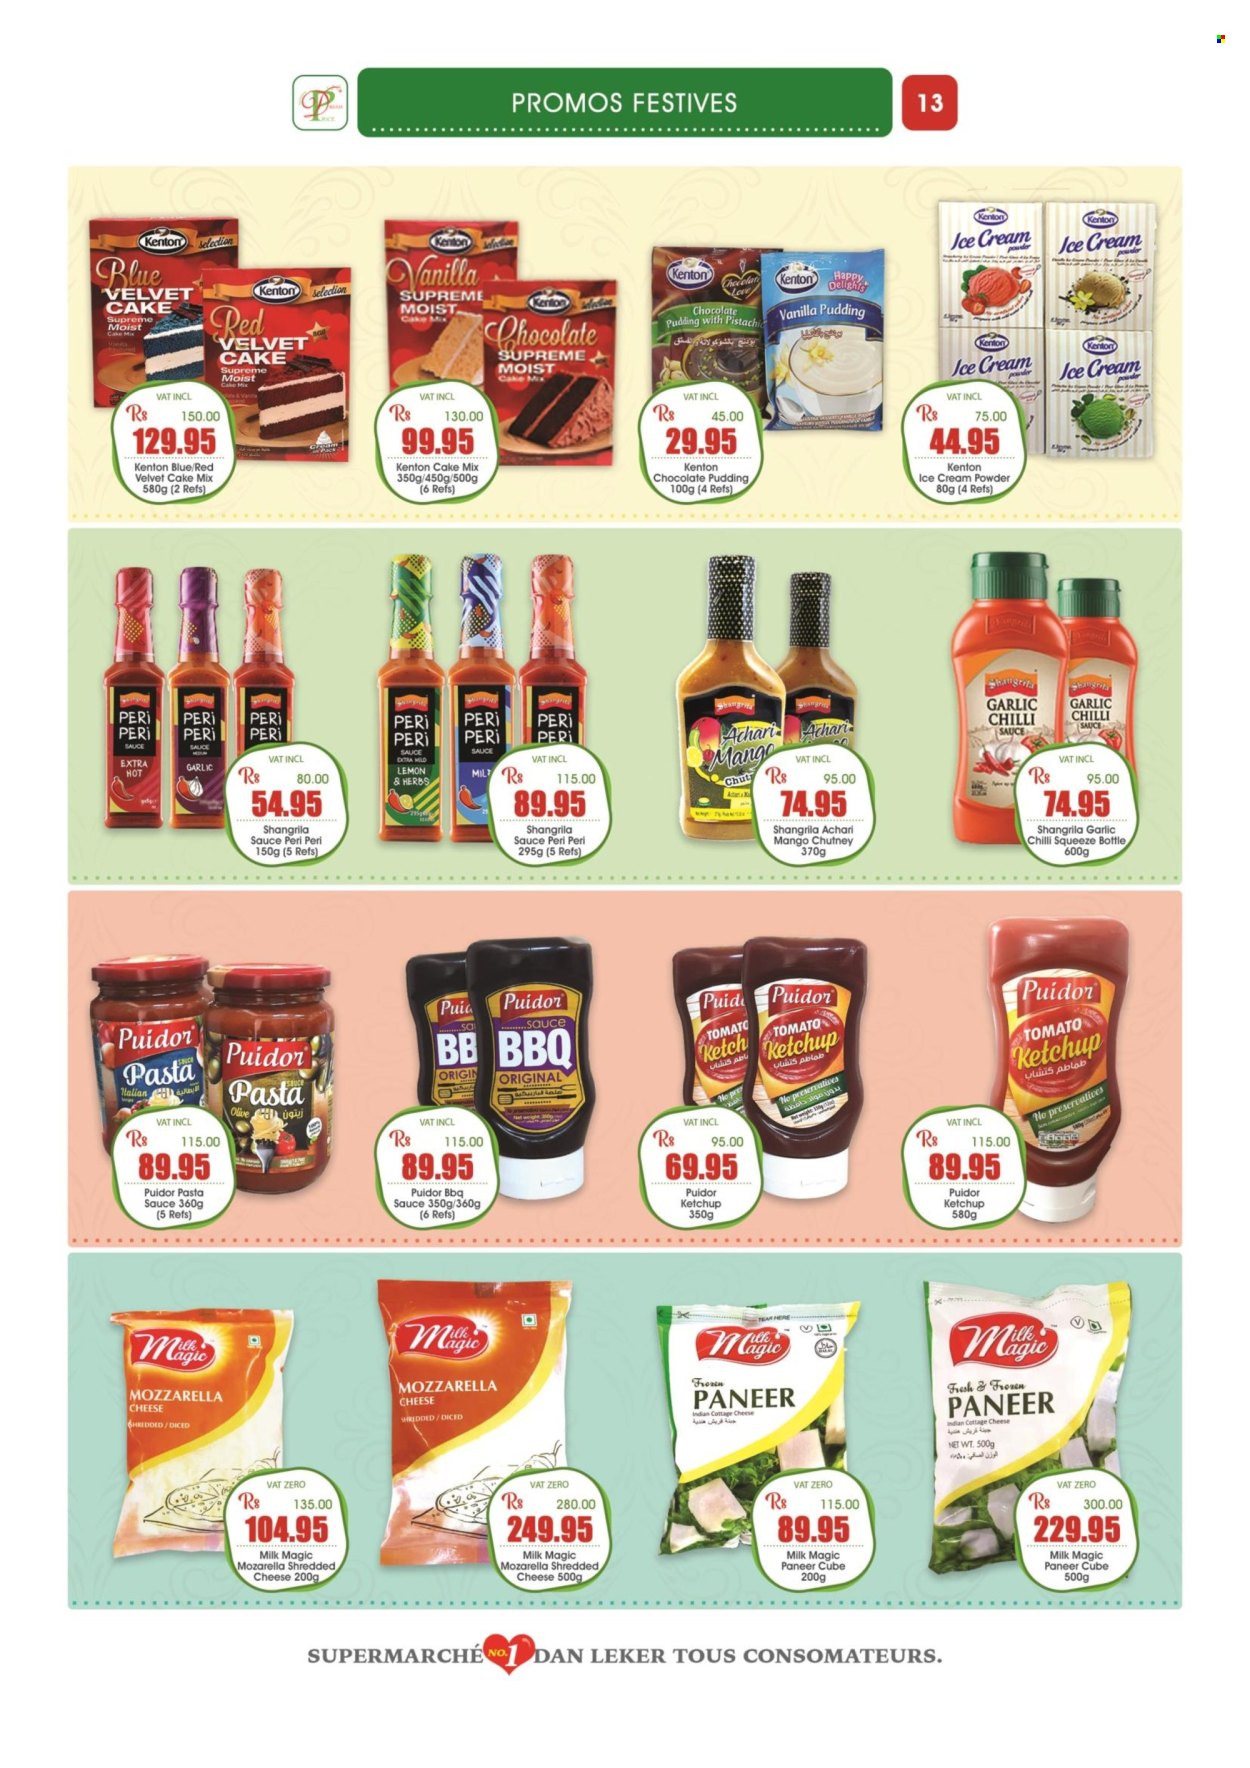 thumbnail - Dreamprice Catalogue - 15.10.2022 - 13.11.2022 - Sales products - cake mix, garlic, pasta sauce, sauce, cottage cheese, shredded cheese, paneer, pudding, chocolate pudding, milk, ice cream, BBQ sauce, chilli sauce, chutney, peri peri sauce, mozzarella, ketchup. Page 13.